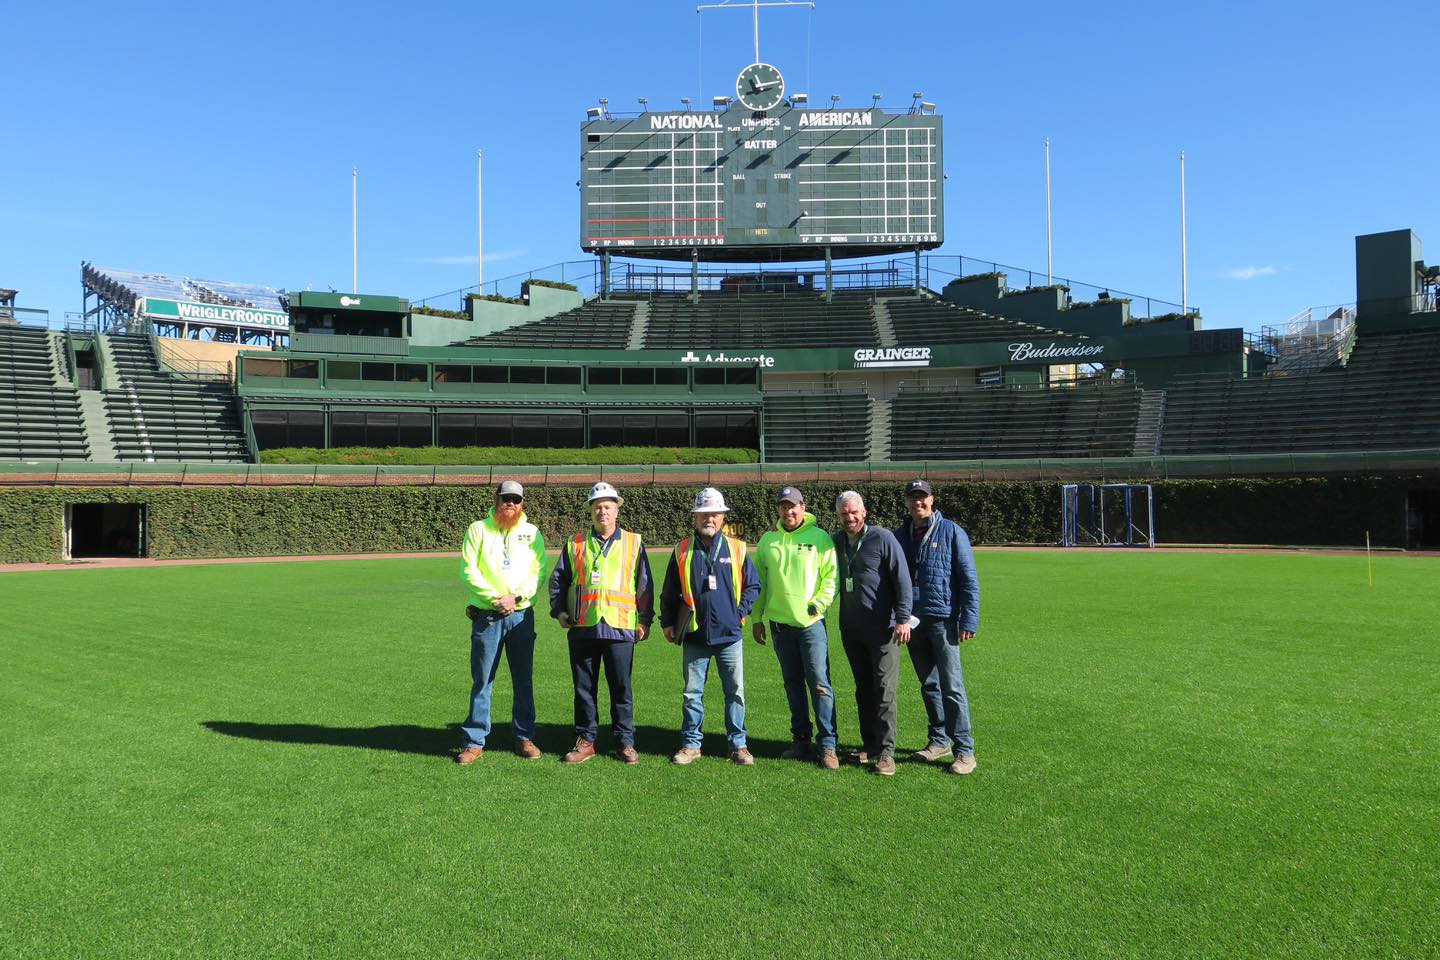 Carpenters pose at Wrigley Field